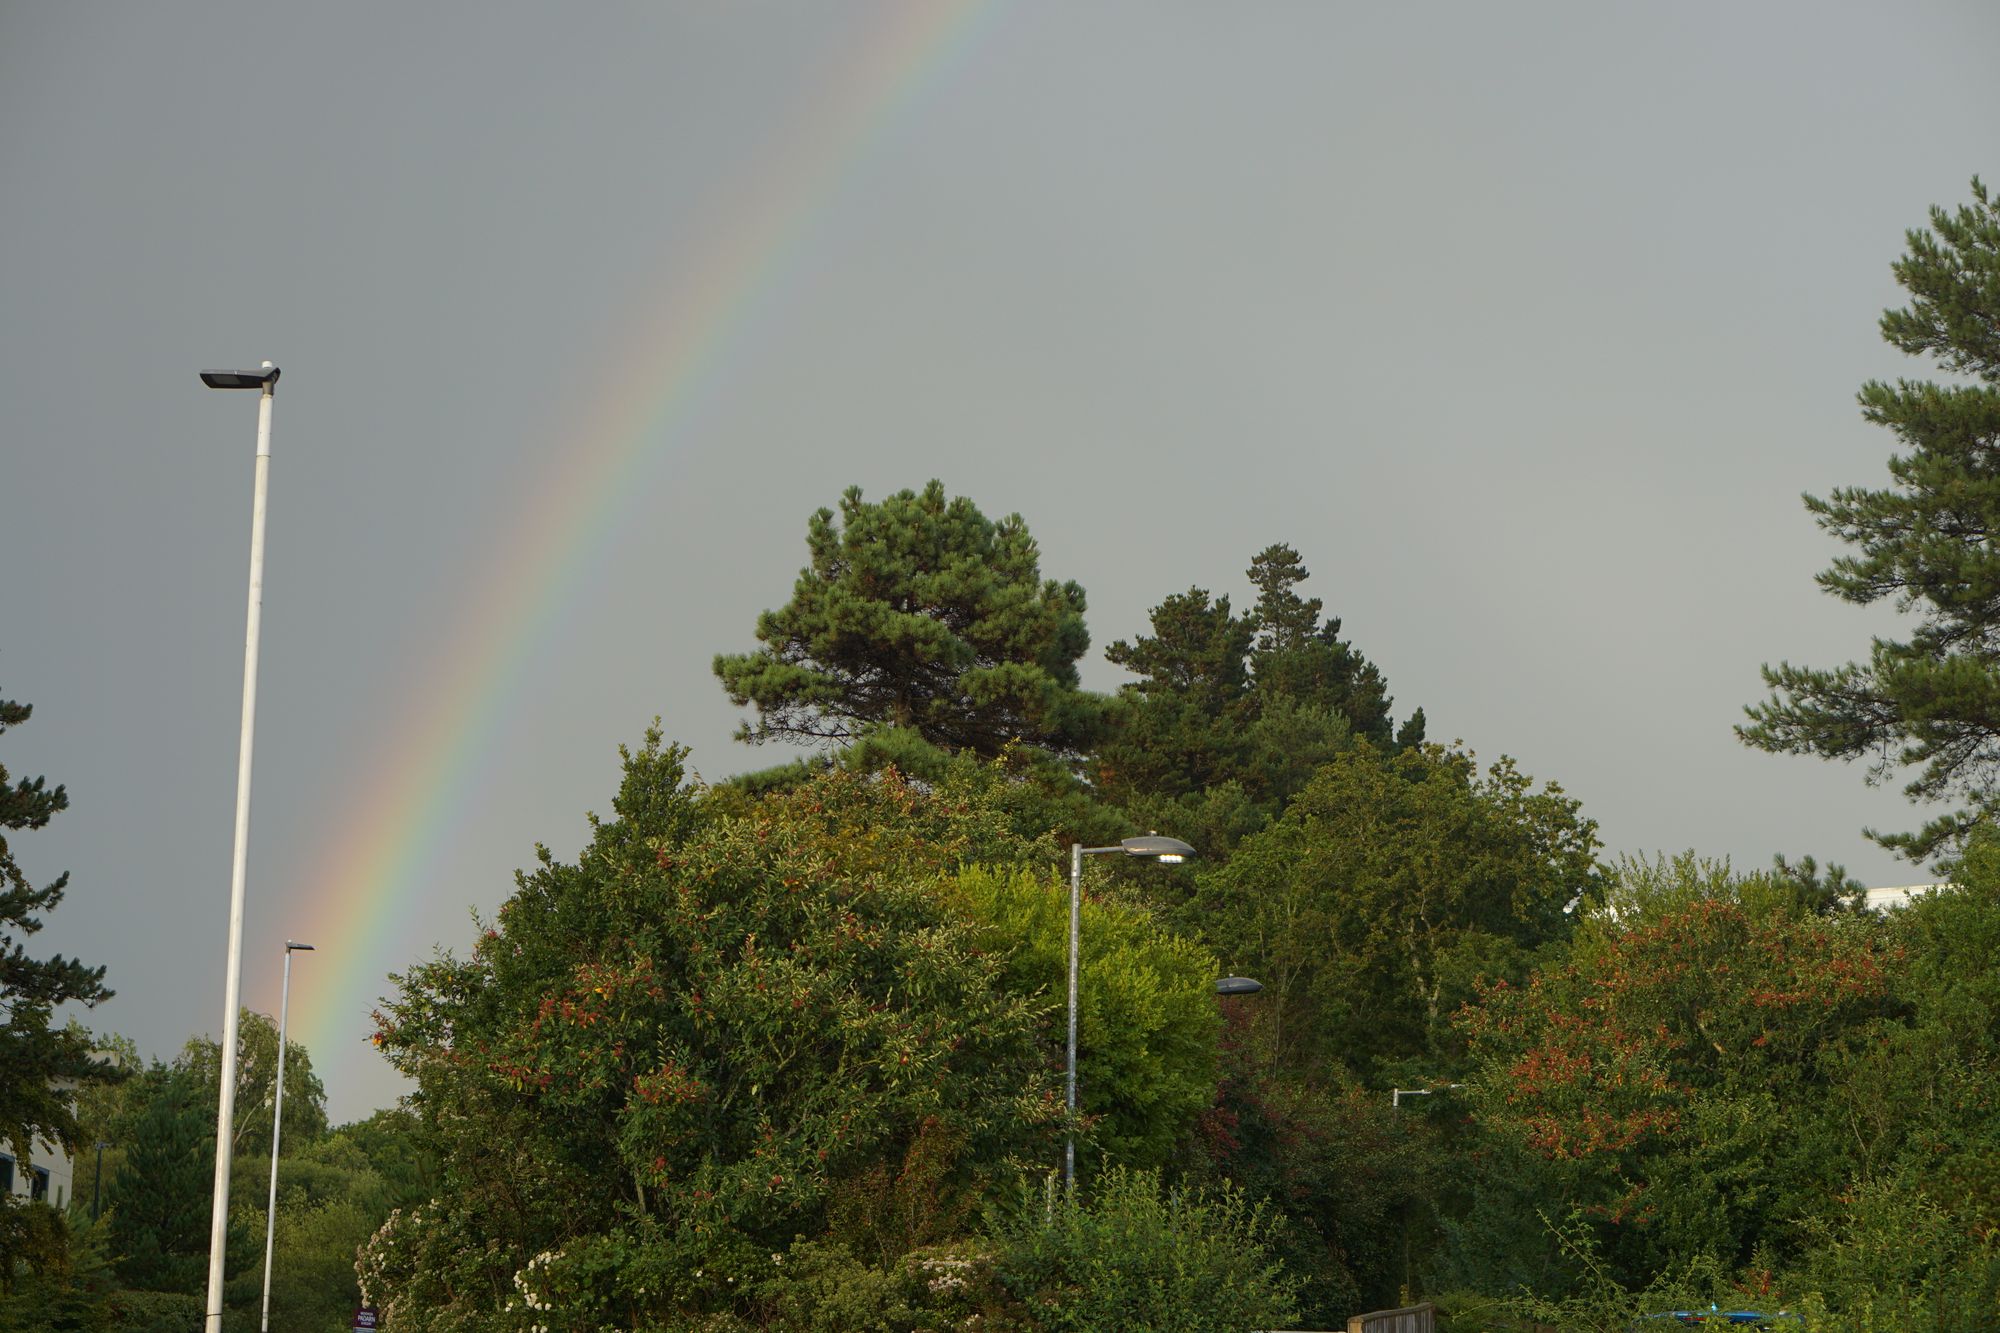 A rainbow on a dark, grey, cloudy sky rises from some trees (some with red berries on them) with some lampposts set among them.